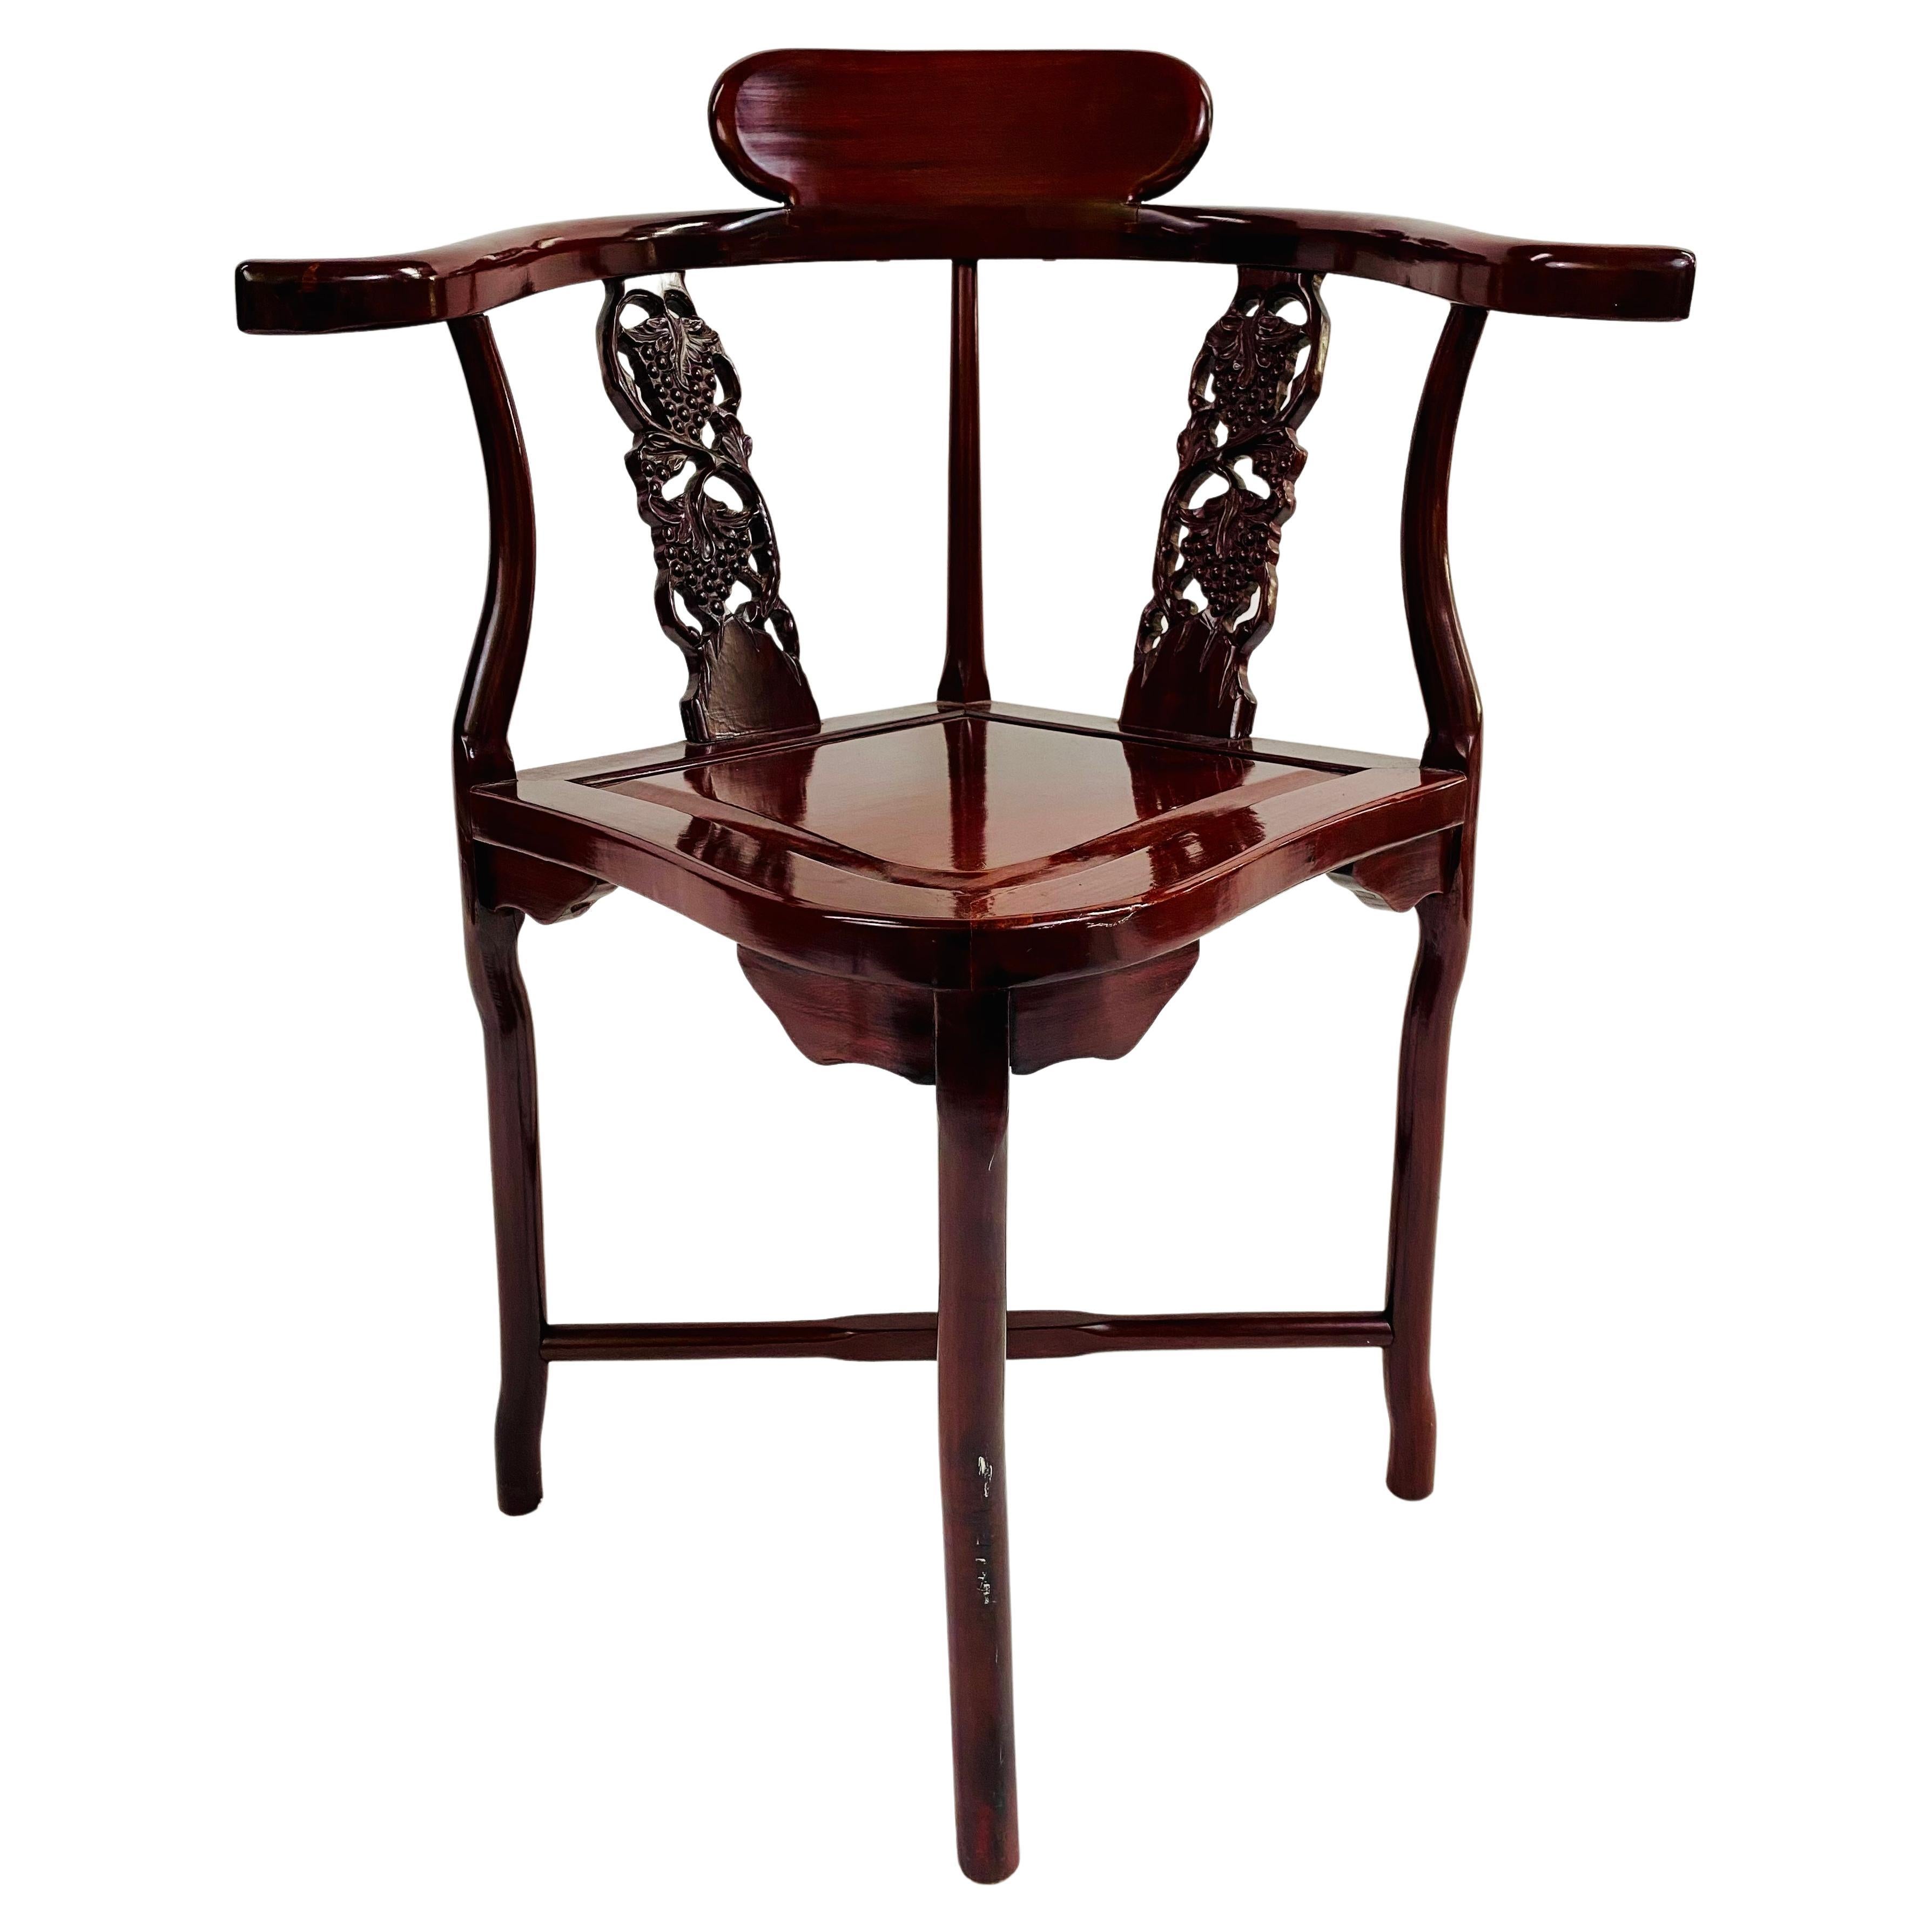 A beautiful Chinese export oriental corner chair. The chair is finely hand-carved of quality rosewood with shiny lacquer finish and is made using tongue and groove technique. The back of the chair shows lovely grapes design and its curvy shape add